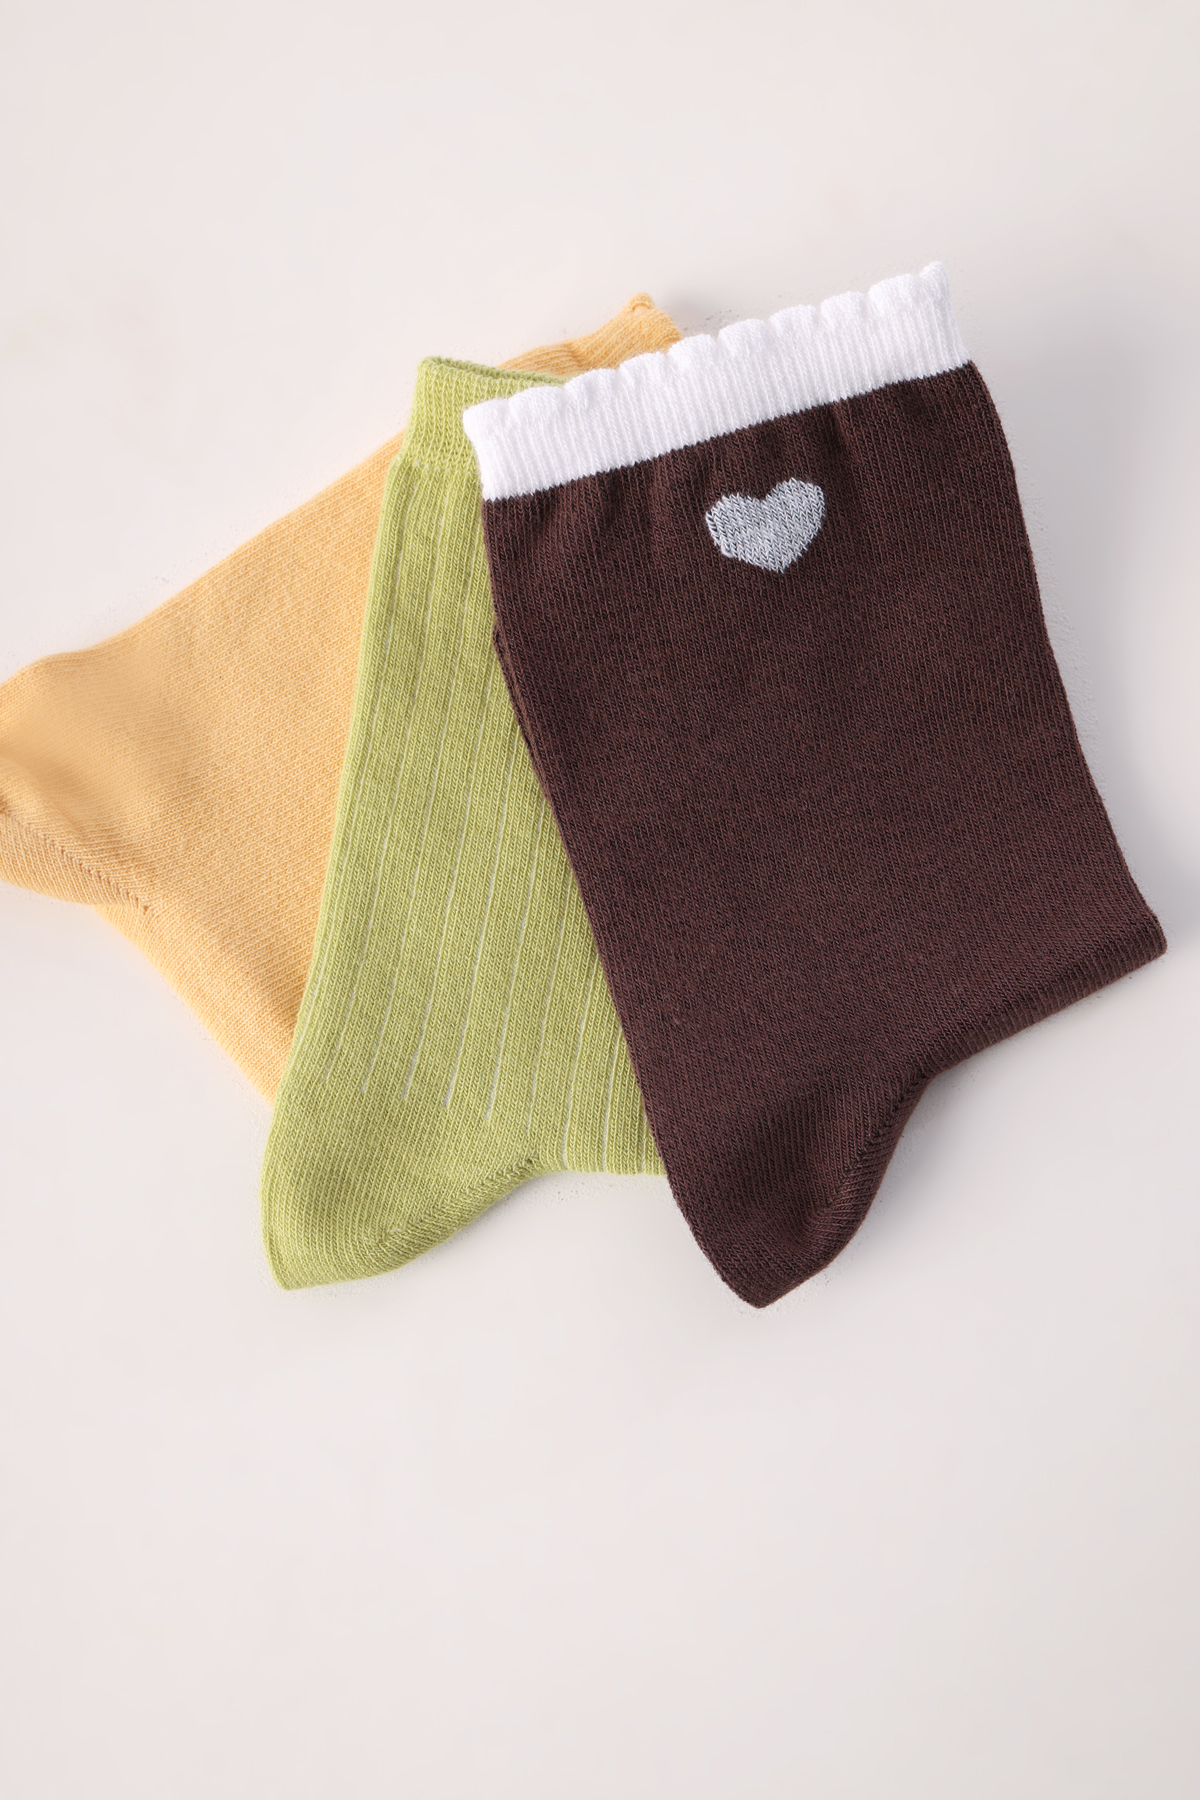 A wholesale clothing model wears -brown-green 3-Piece Socks Set - Yellow, Turkish wholesale Socks of Allday